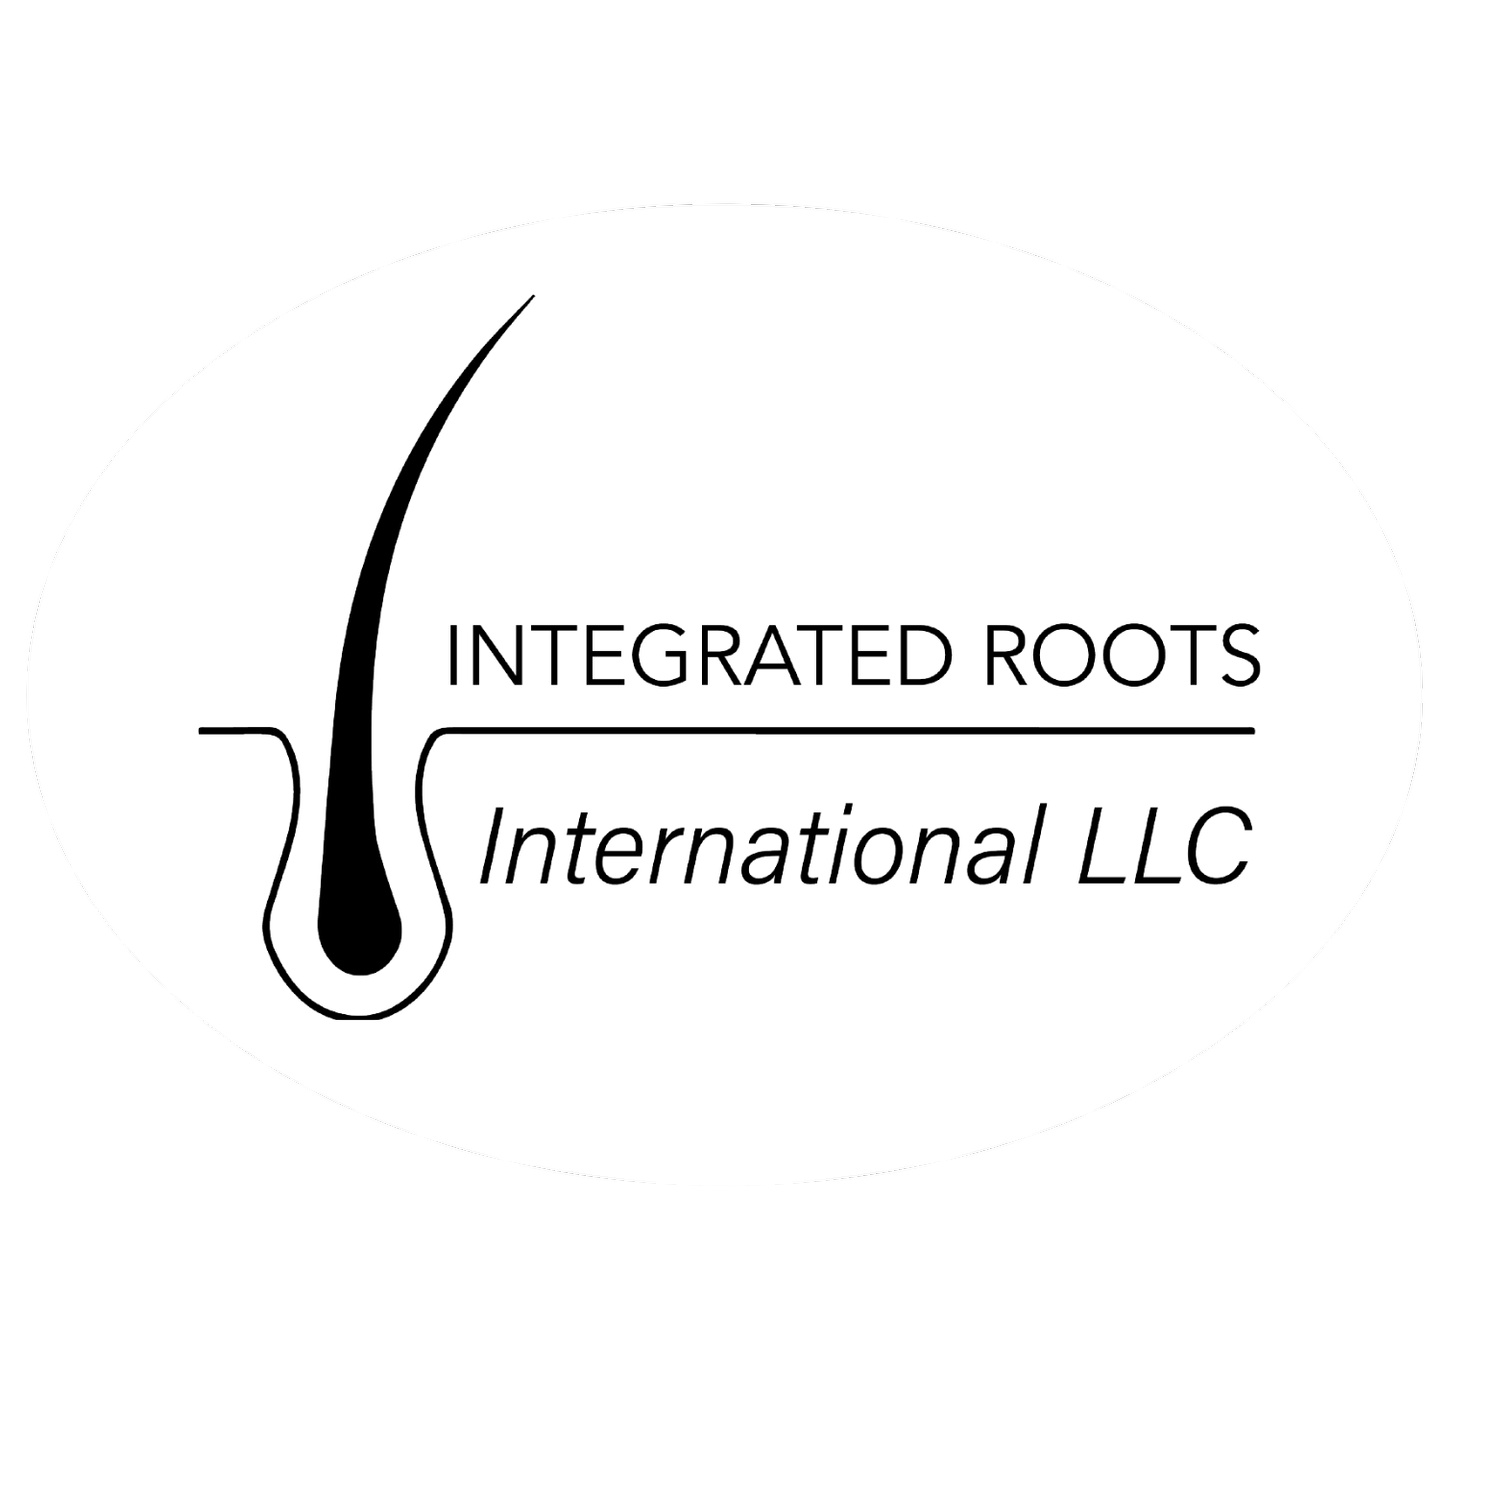 INTEGRATED ROOTS INTERNATIONAL